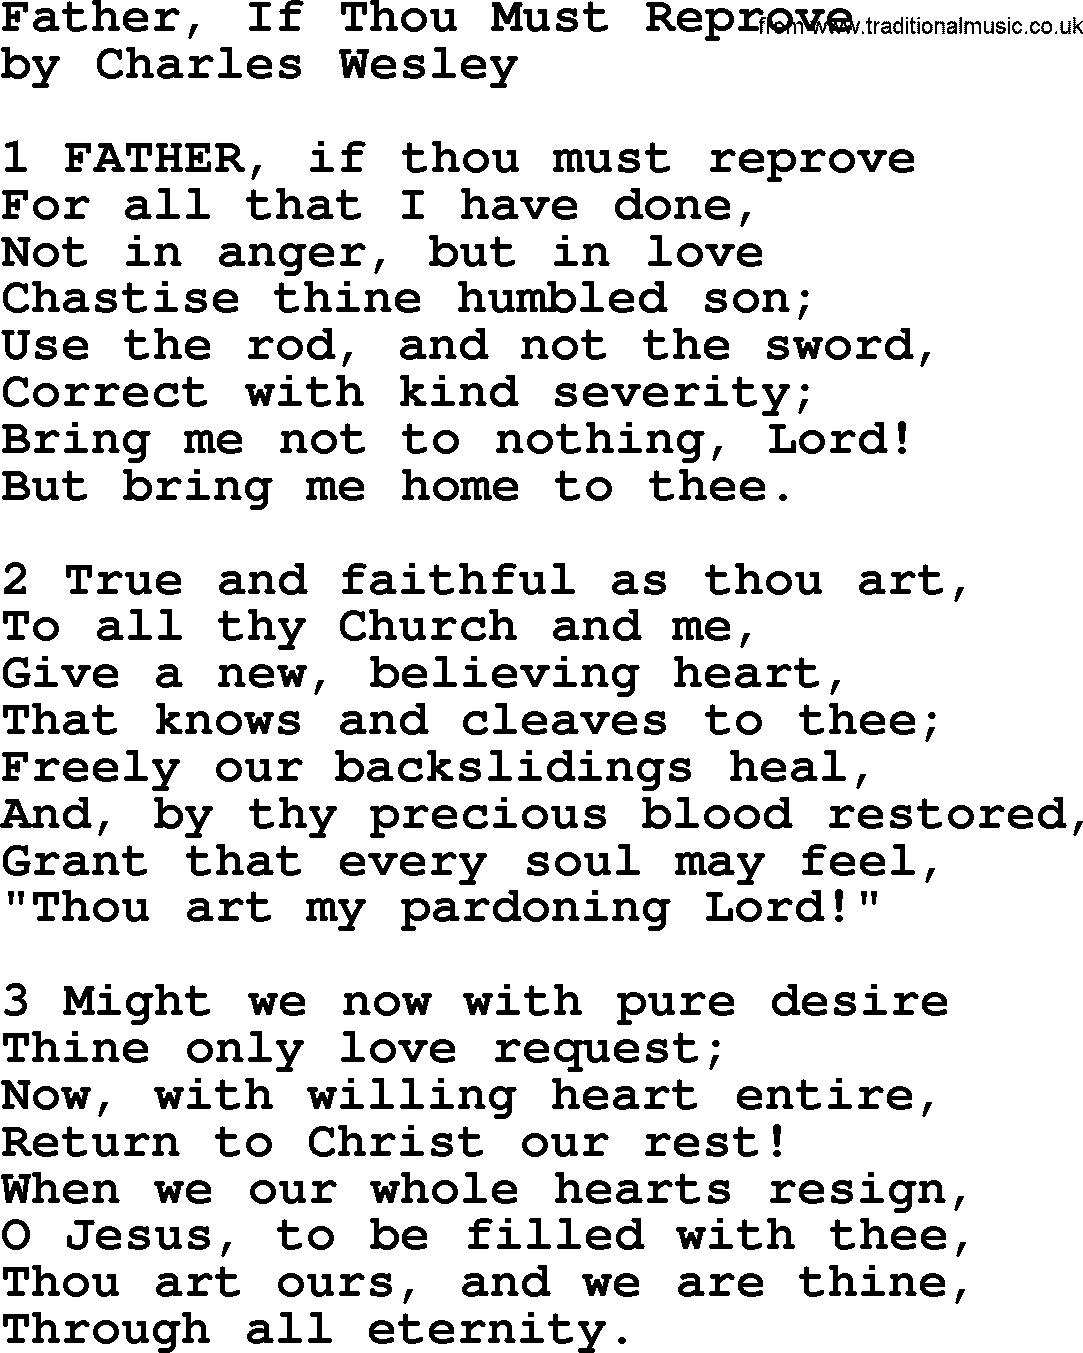 Charles Wesley hymn: Father, If Thou Must Reprove, lyrics